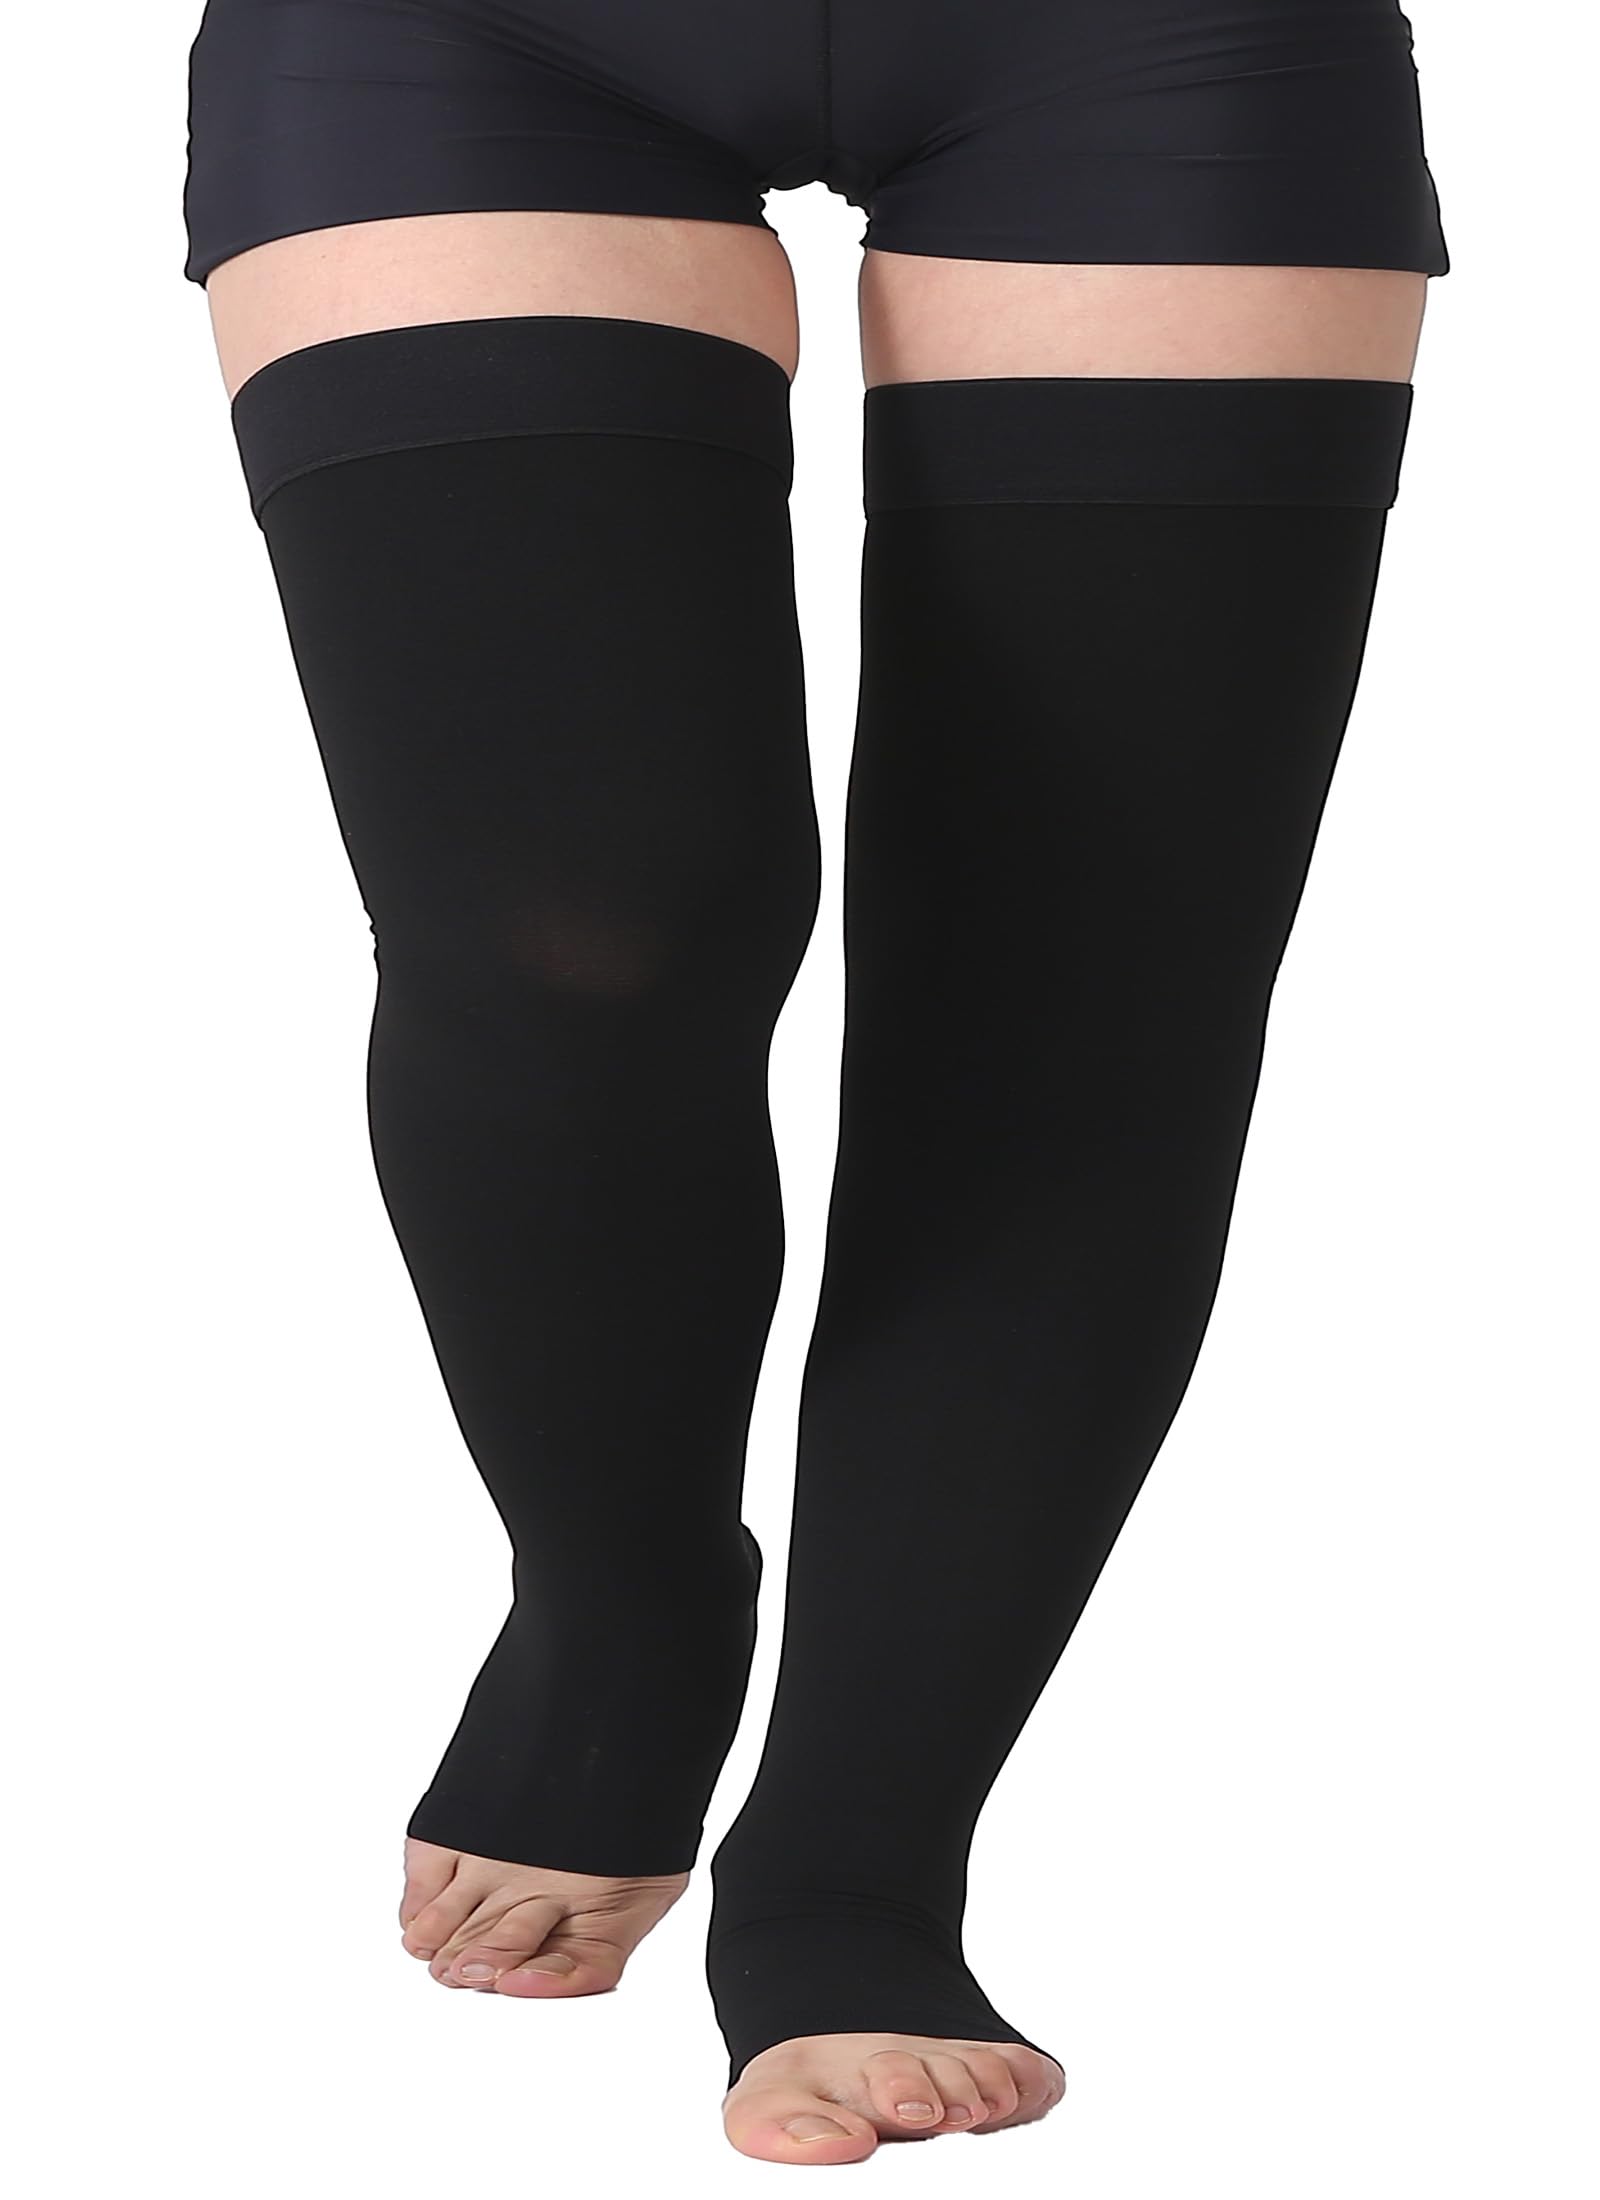 Compression Hosiery. Medical Compression Stockings and Tights for